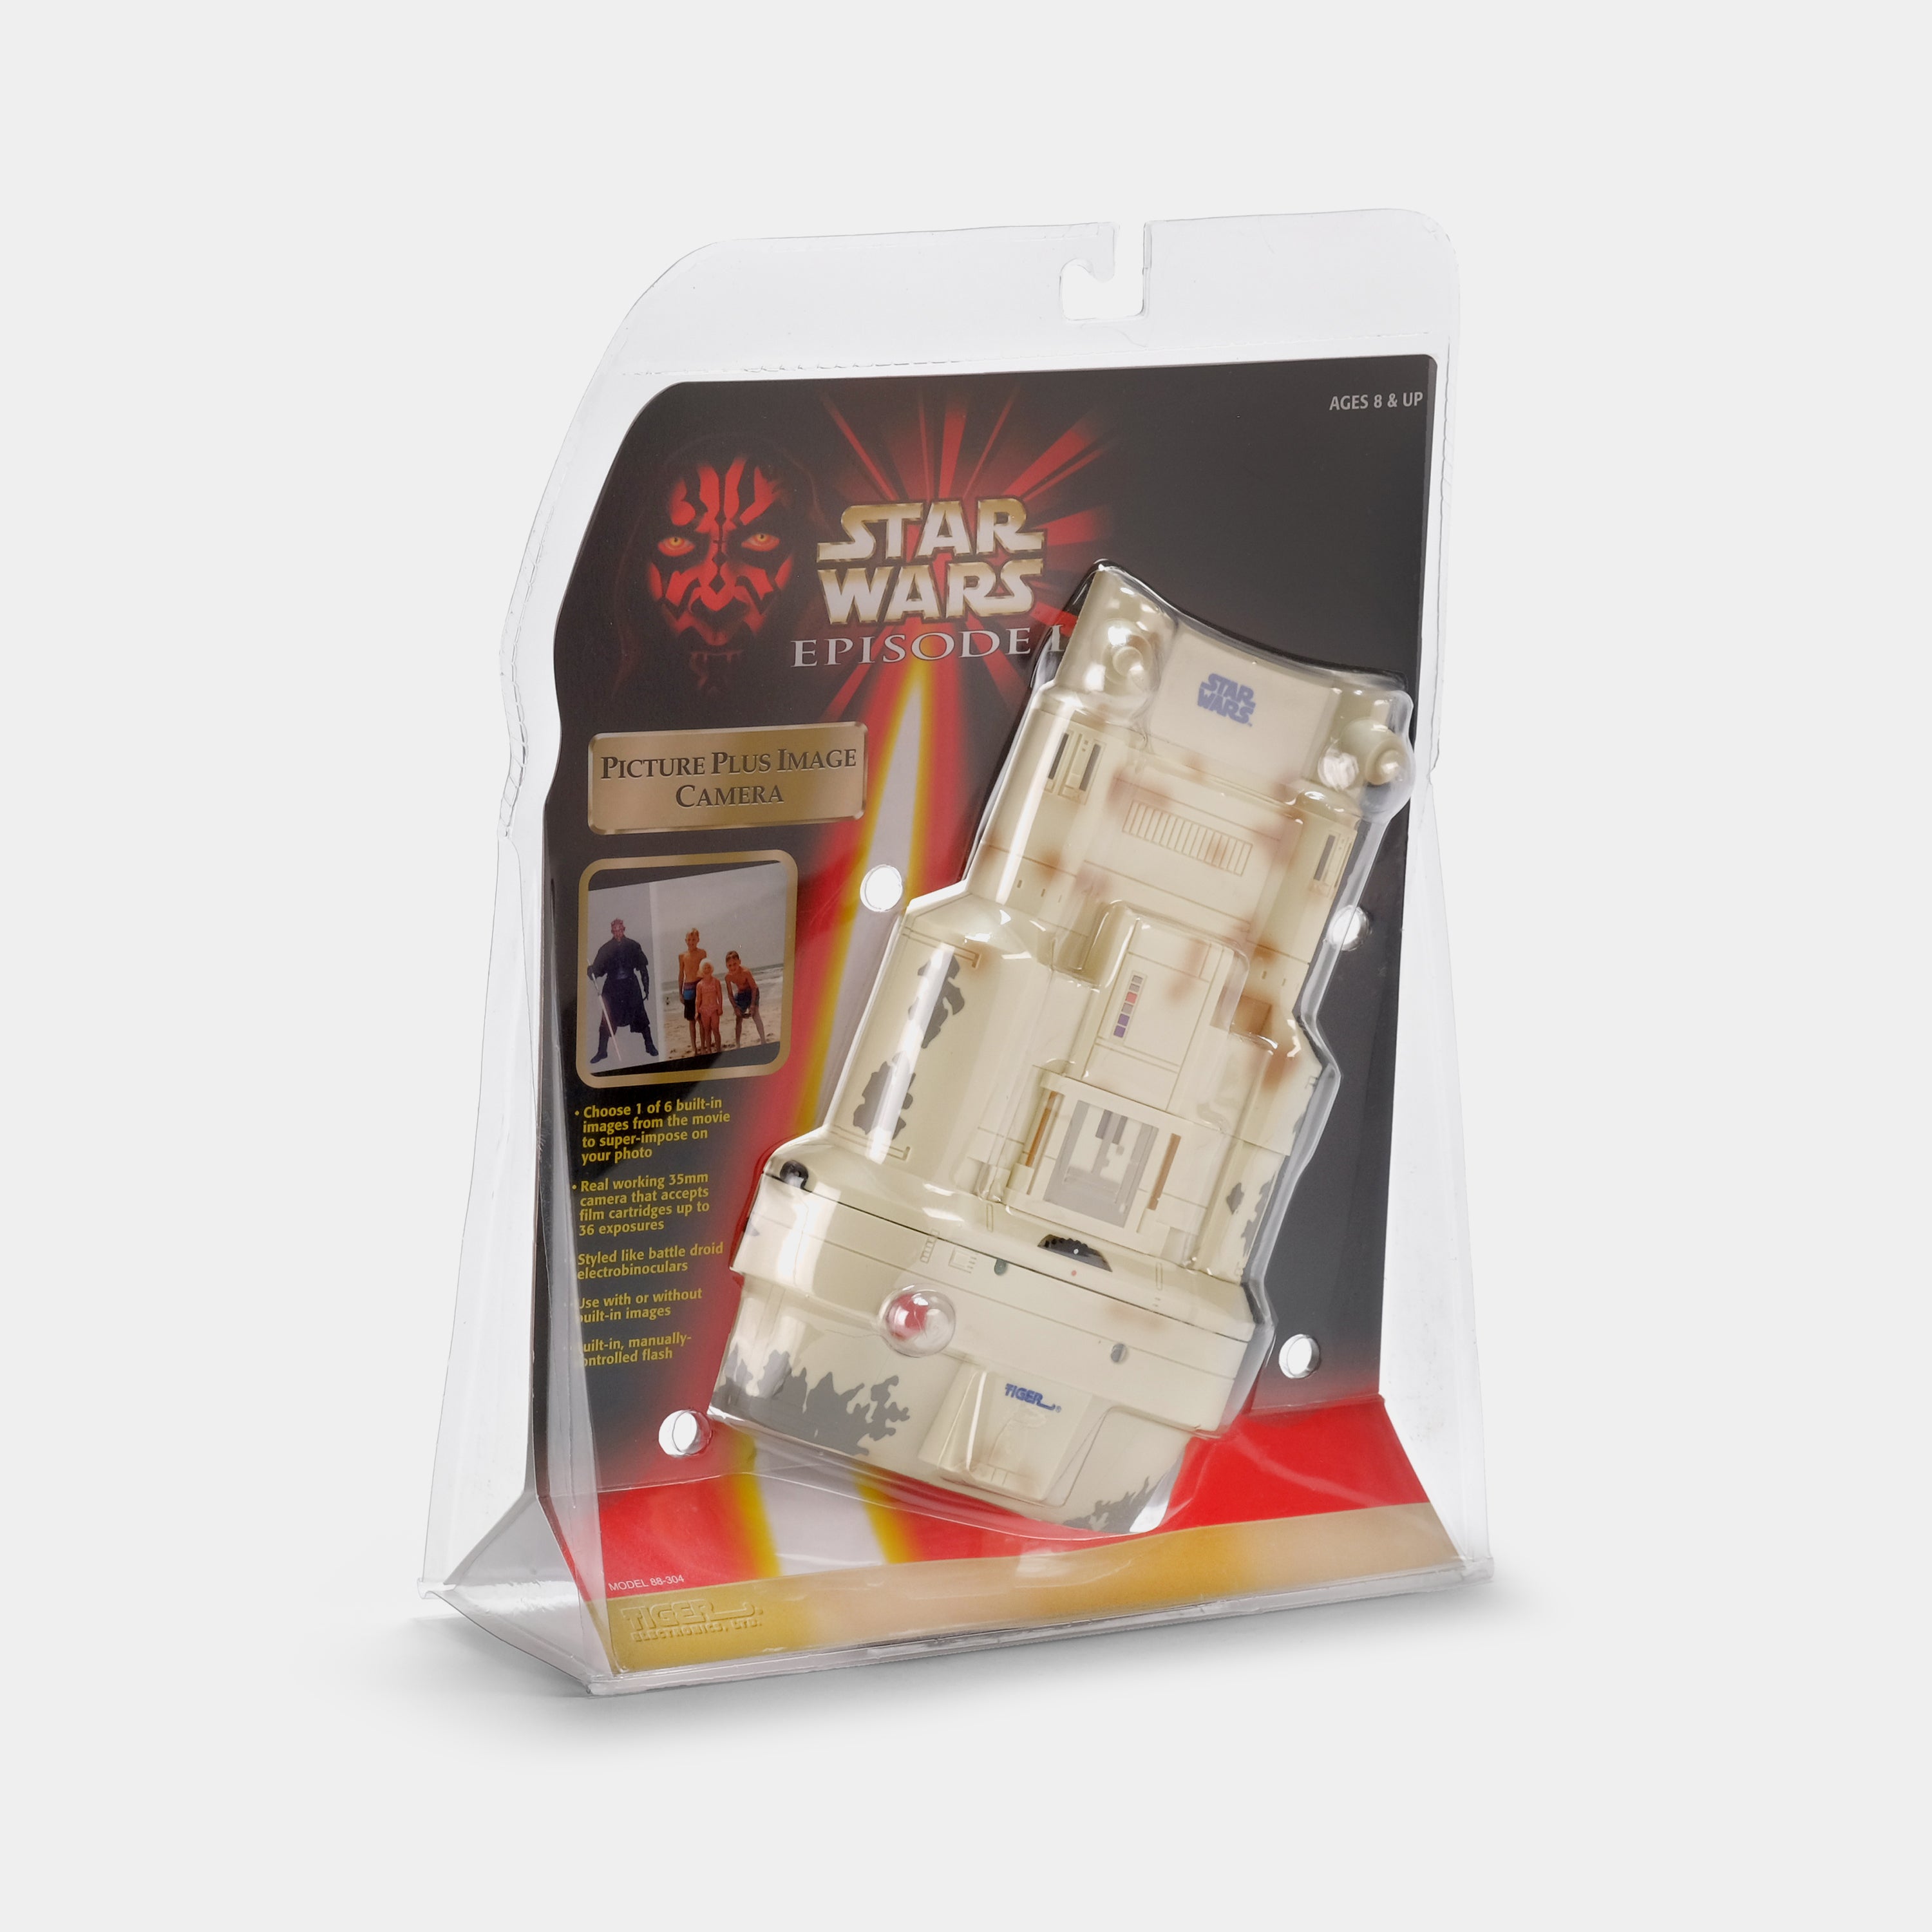 Star Wars: Episode I Picture Plus Image 35mm Point and Shoot Film Camera (New In Packaging)